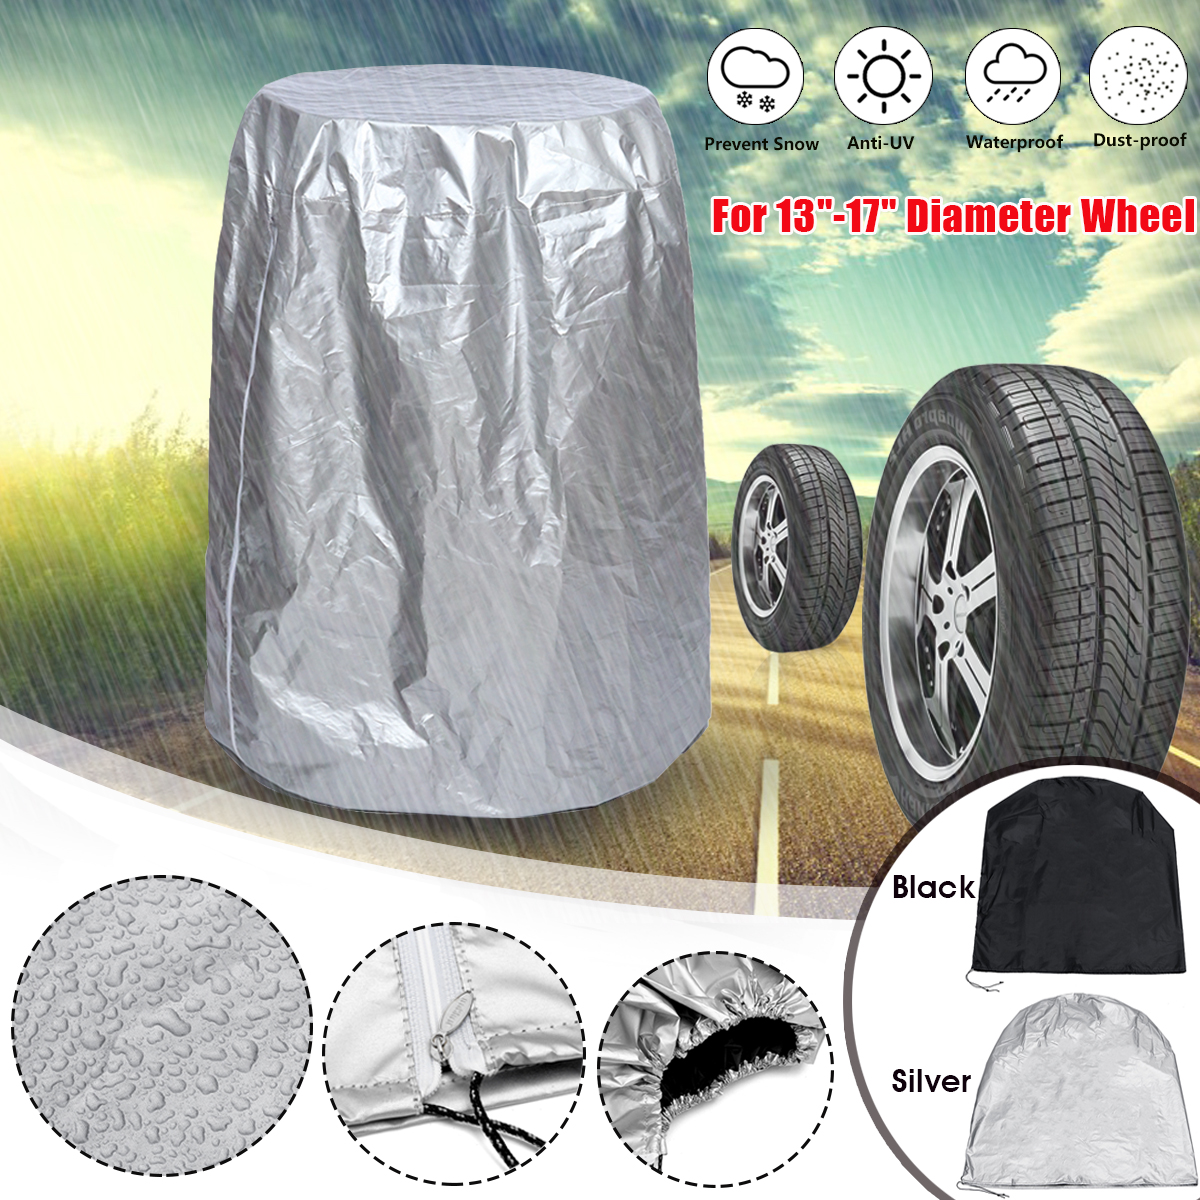 13-17quot-Diameter-Polyester-Car-Wheel-Tire-Cover-for-RV-Trailer-Camper-Car-Truck-Traile-1416637